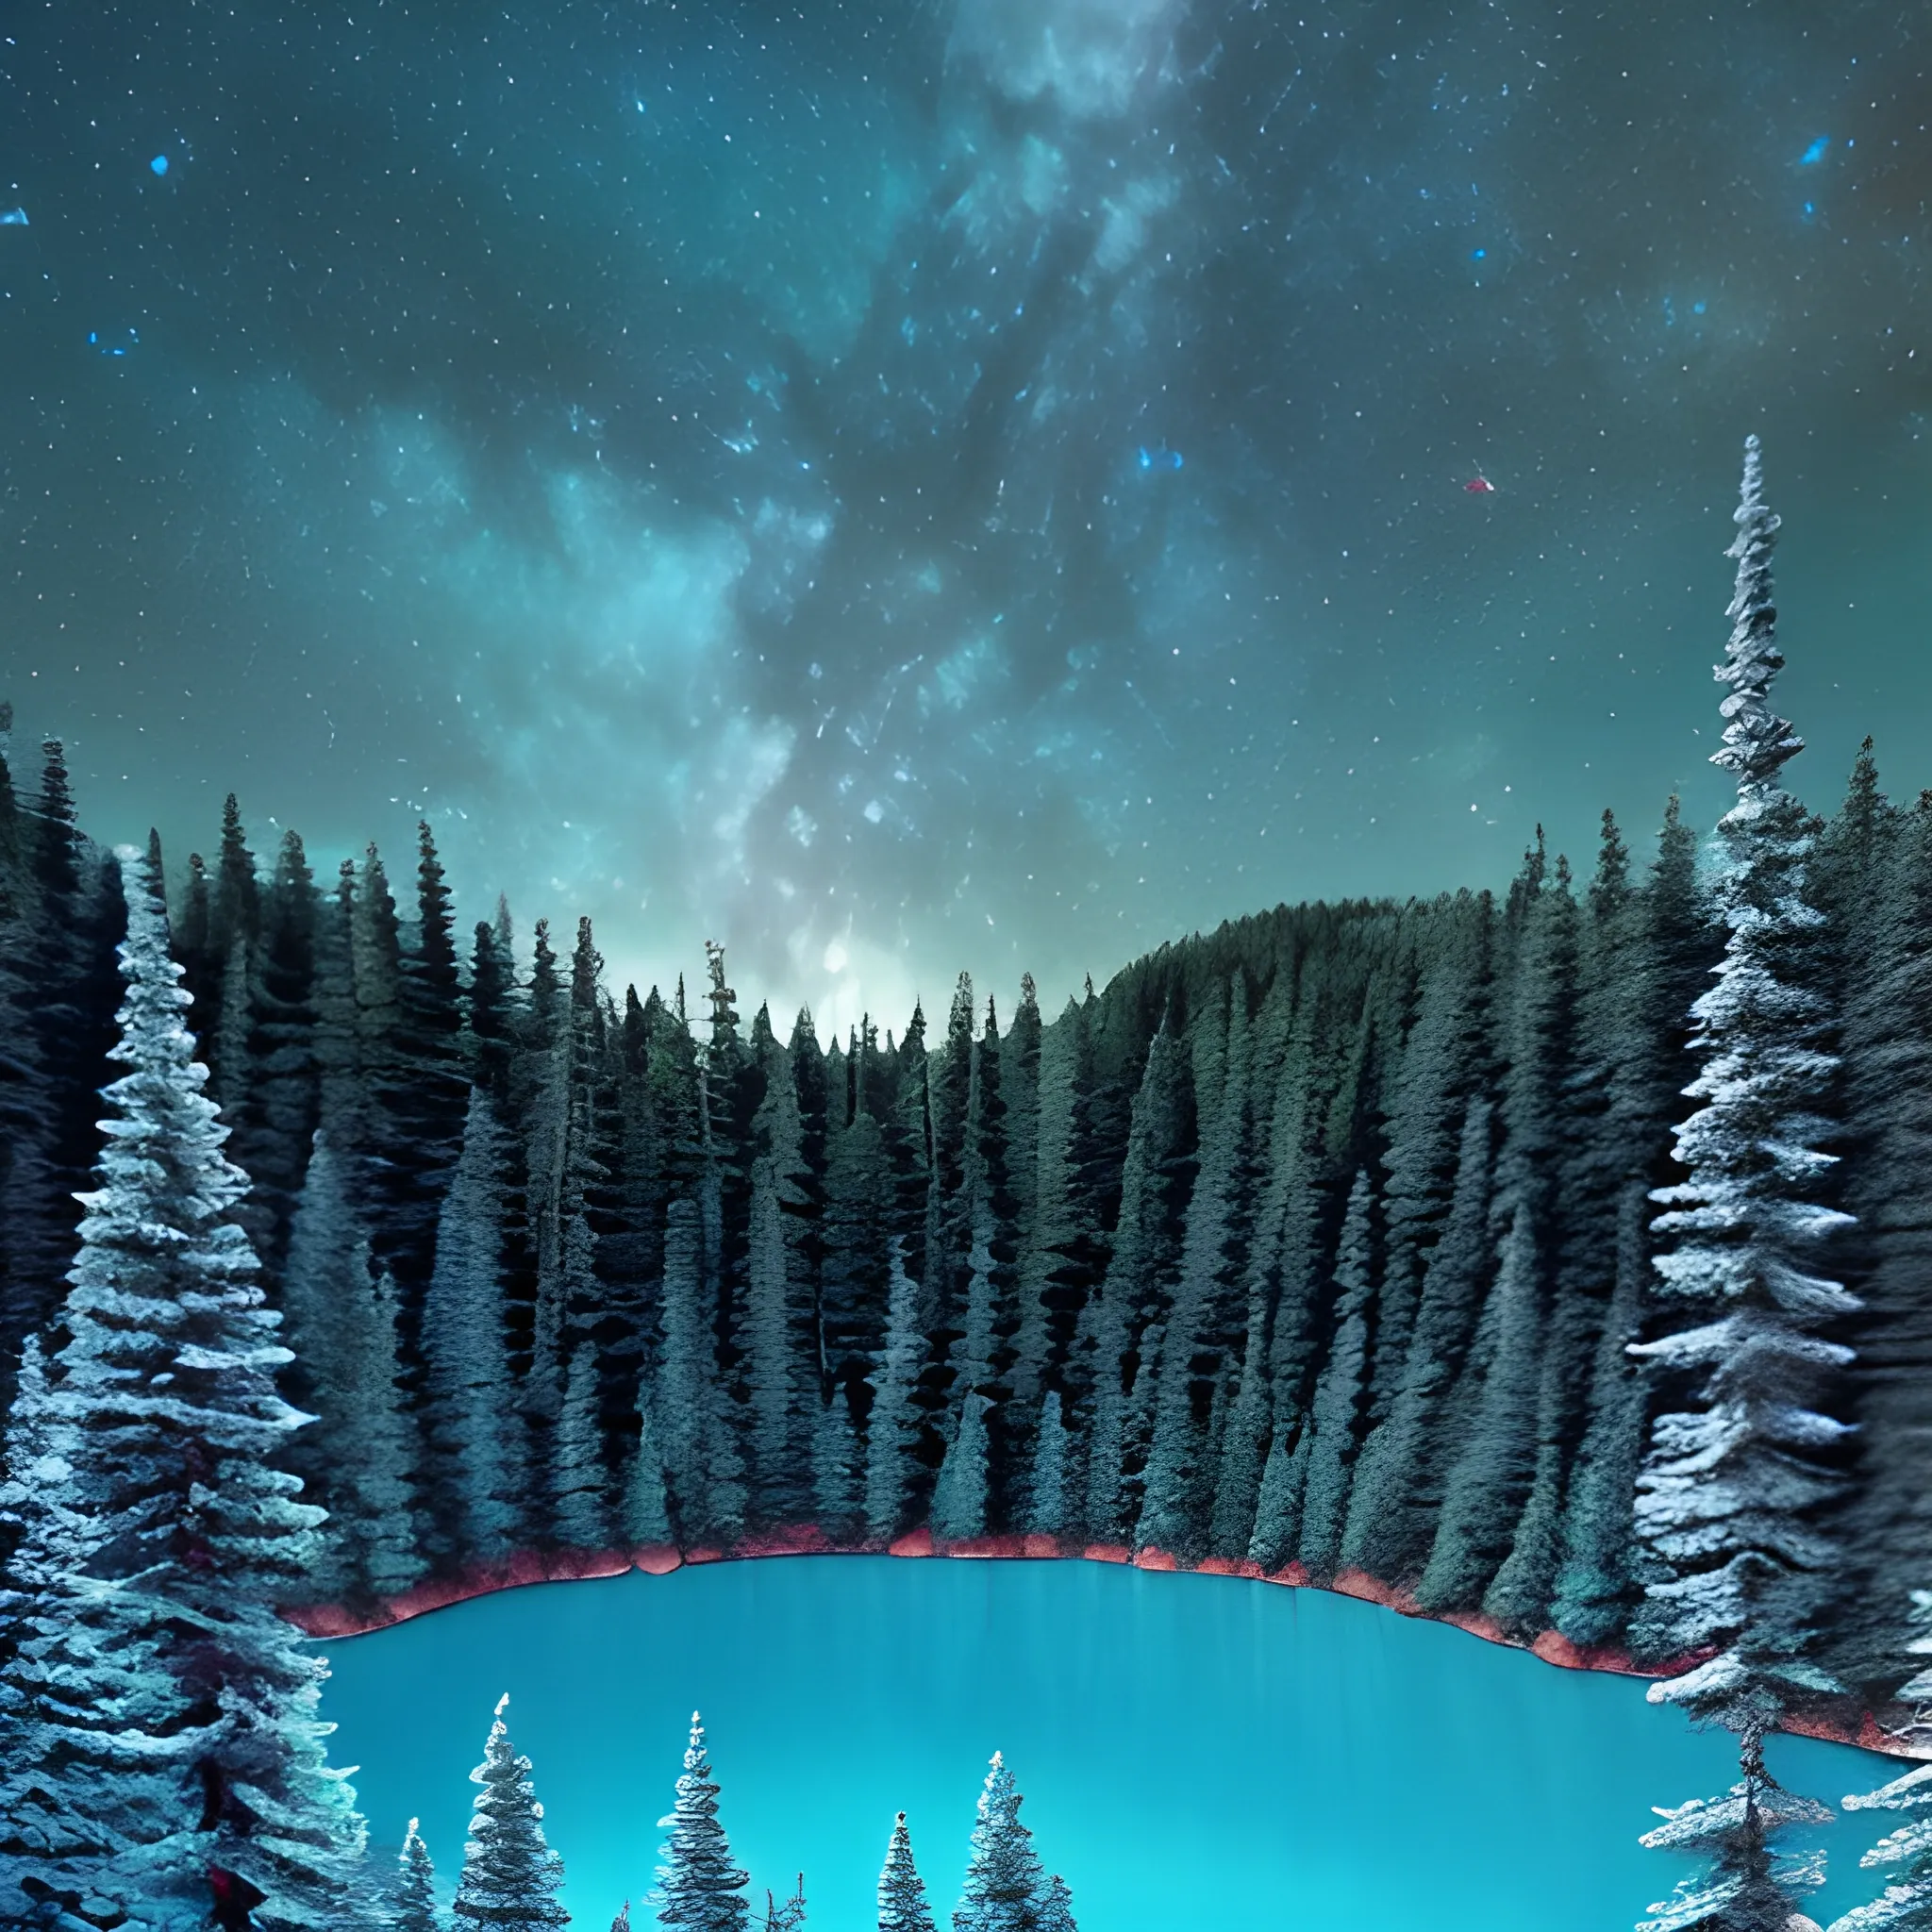 turquoise lake surrounded by trees covered with millennial moss starry sky with galaxies and spaceships crossing space in the background,, 3D